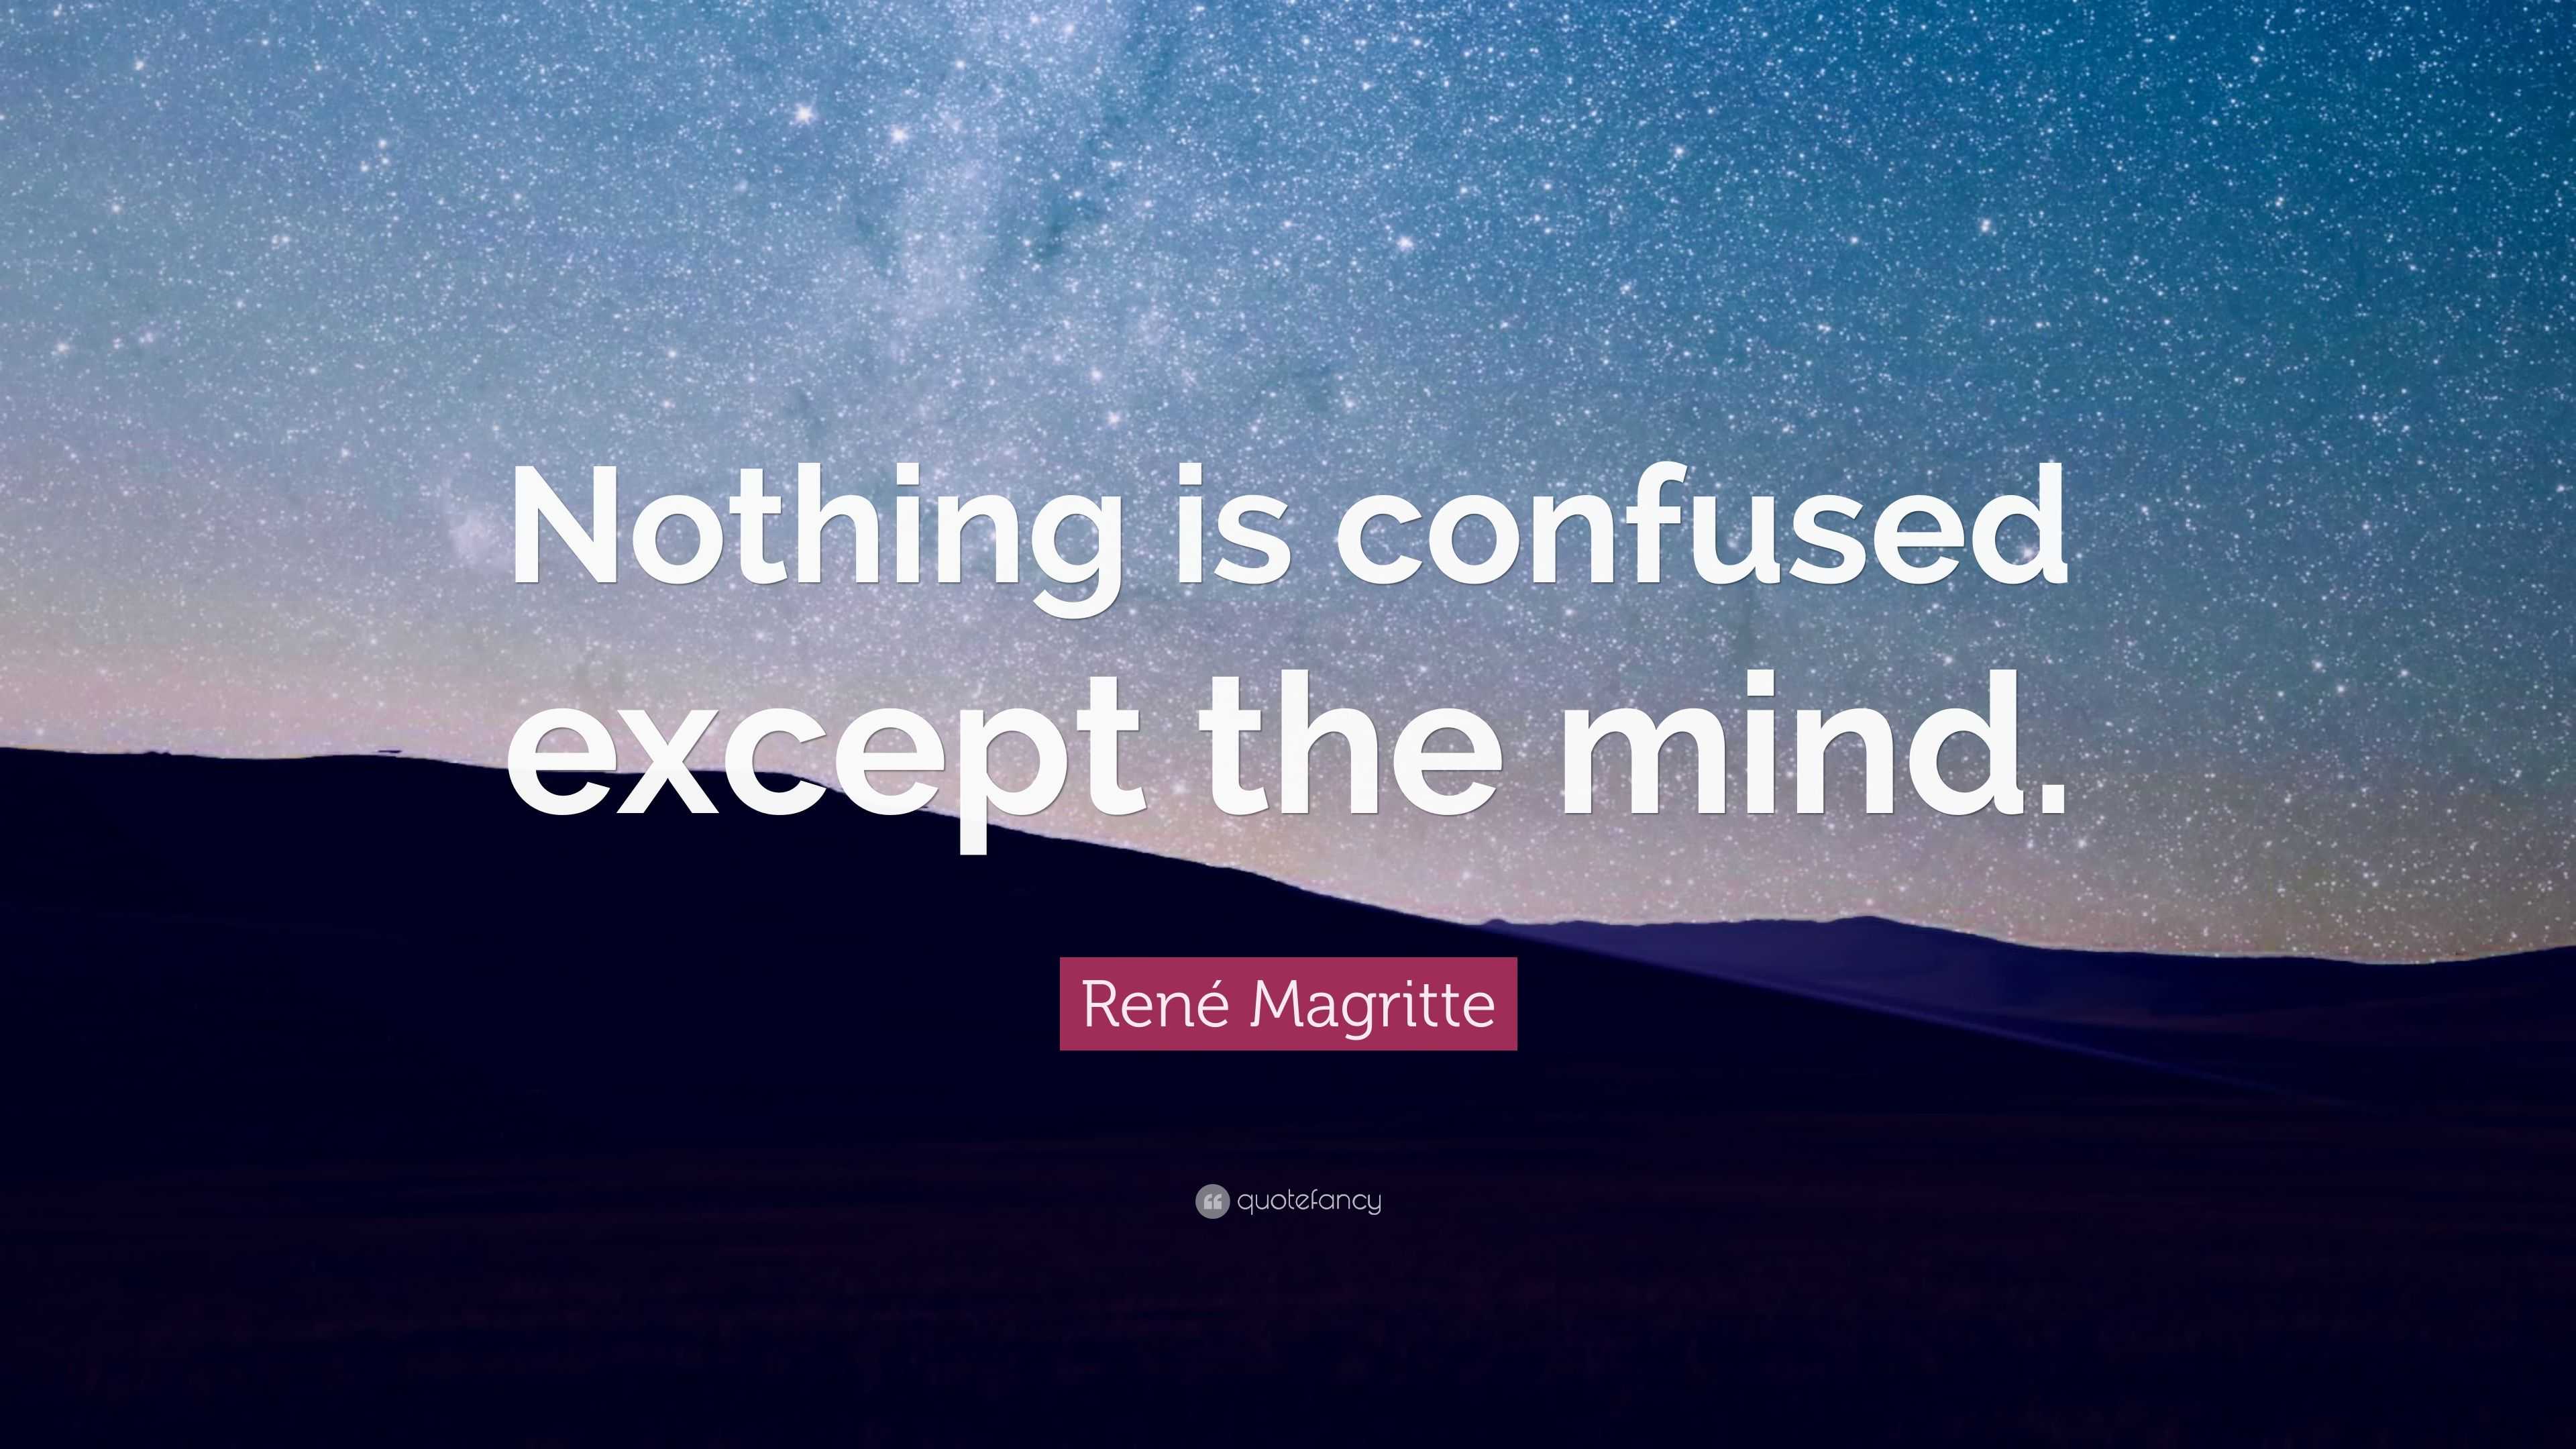 René Magritte Quote: “Nothing is confused except the mind.”
